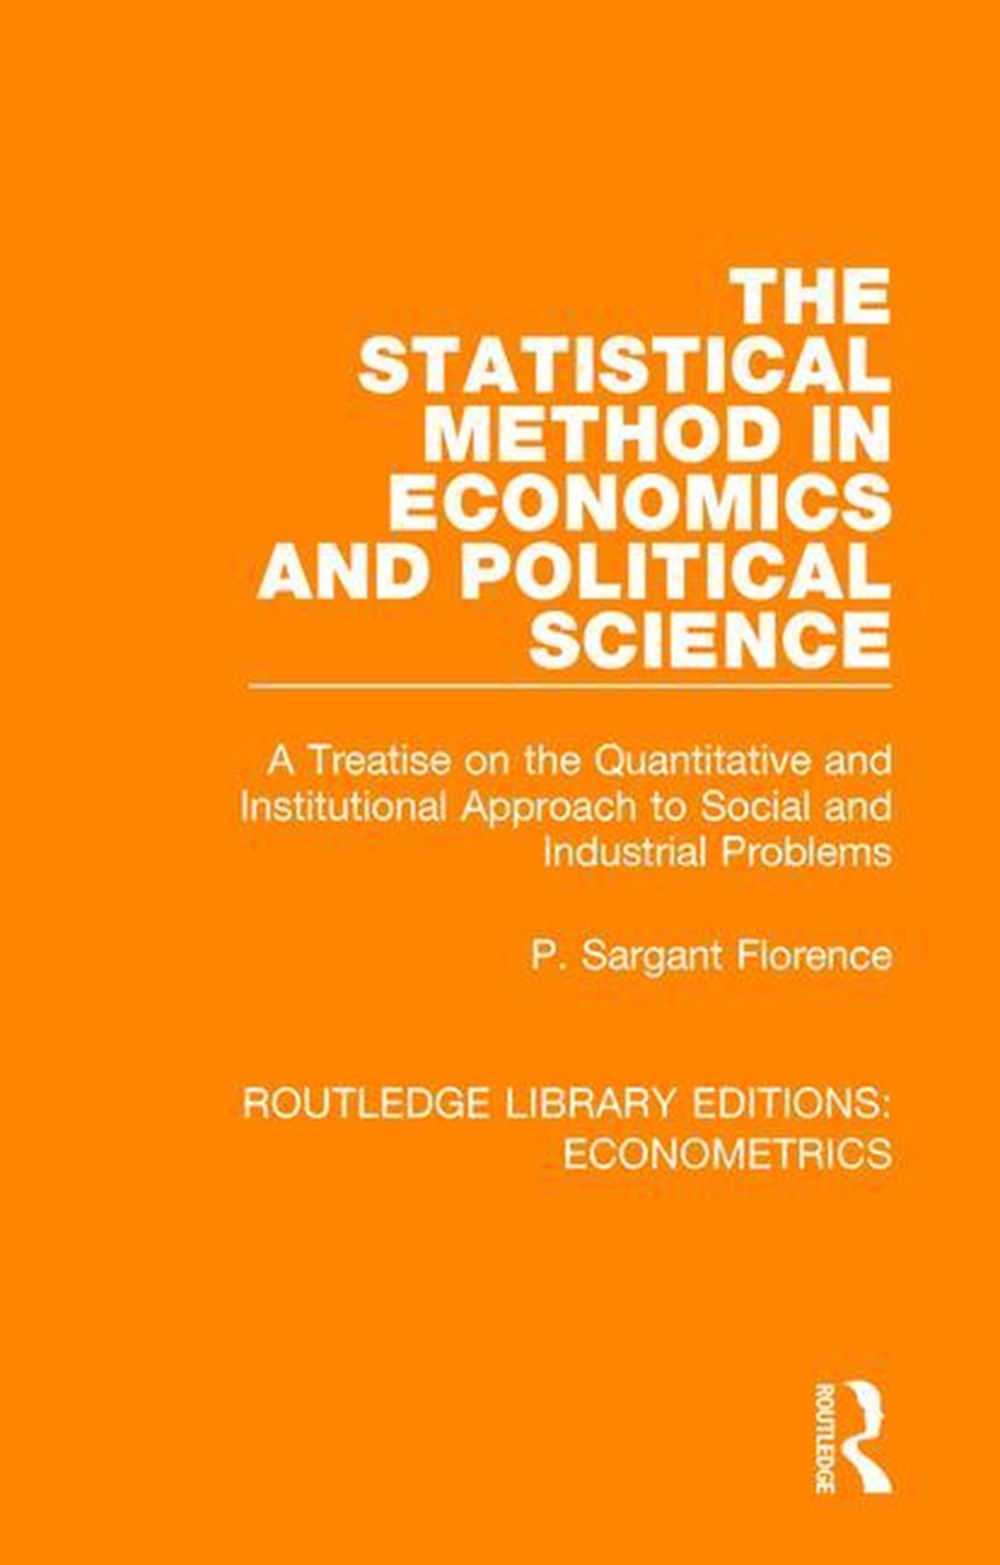 Statistical Method in Economics and Political Science: A Treatise on the Quantitative and Institutio